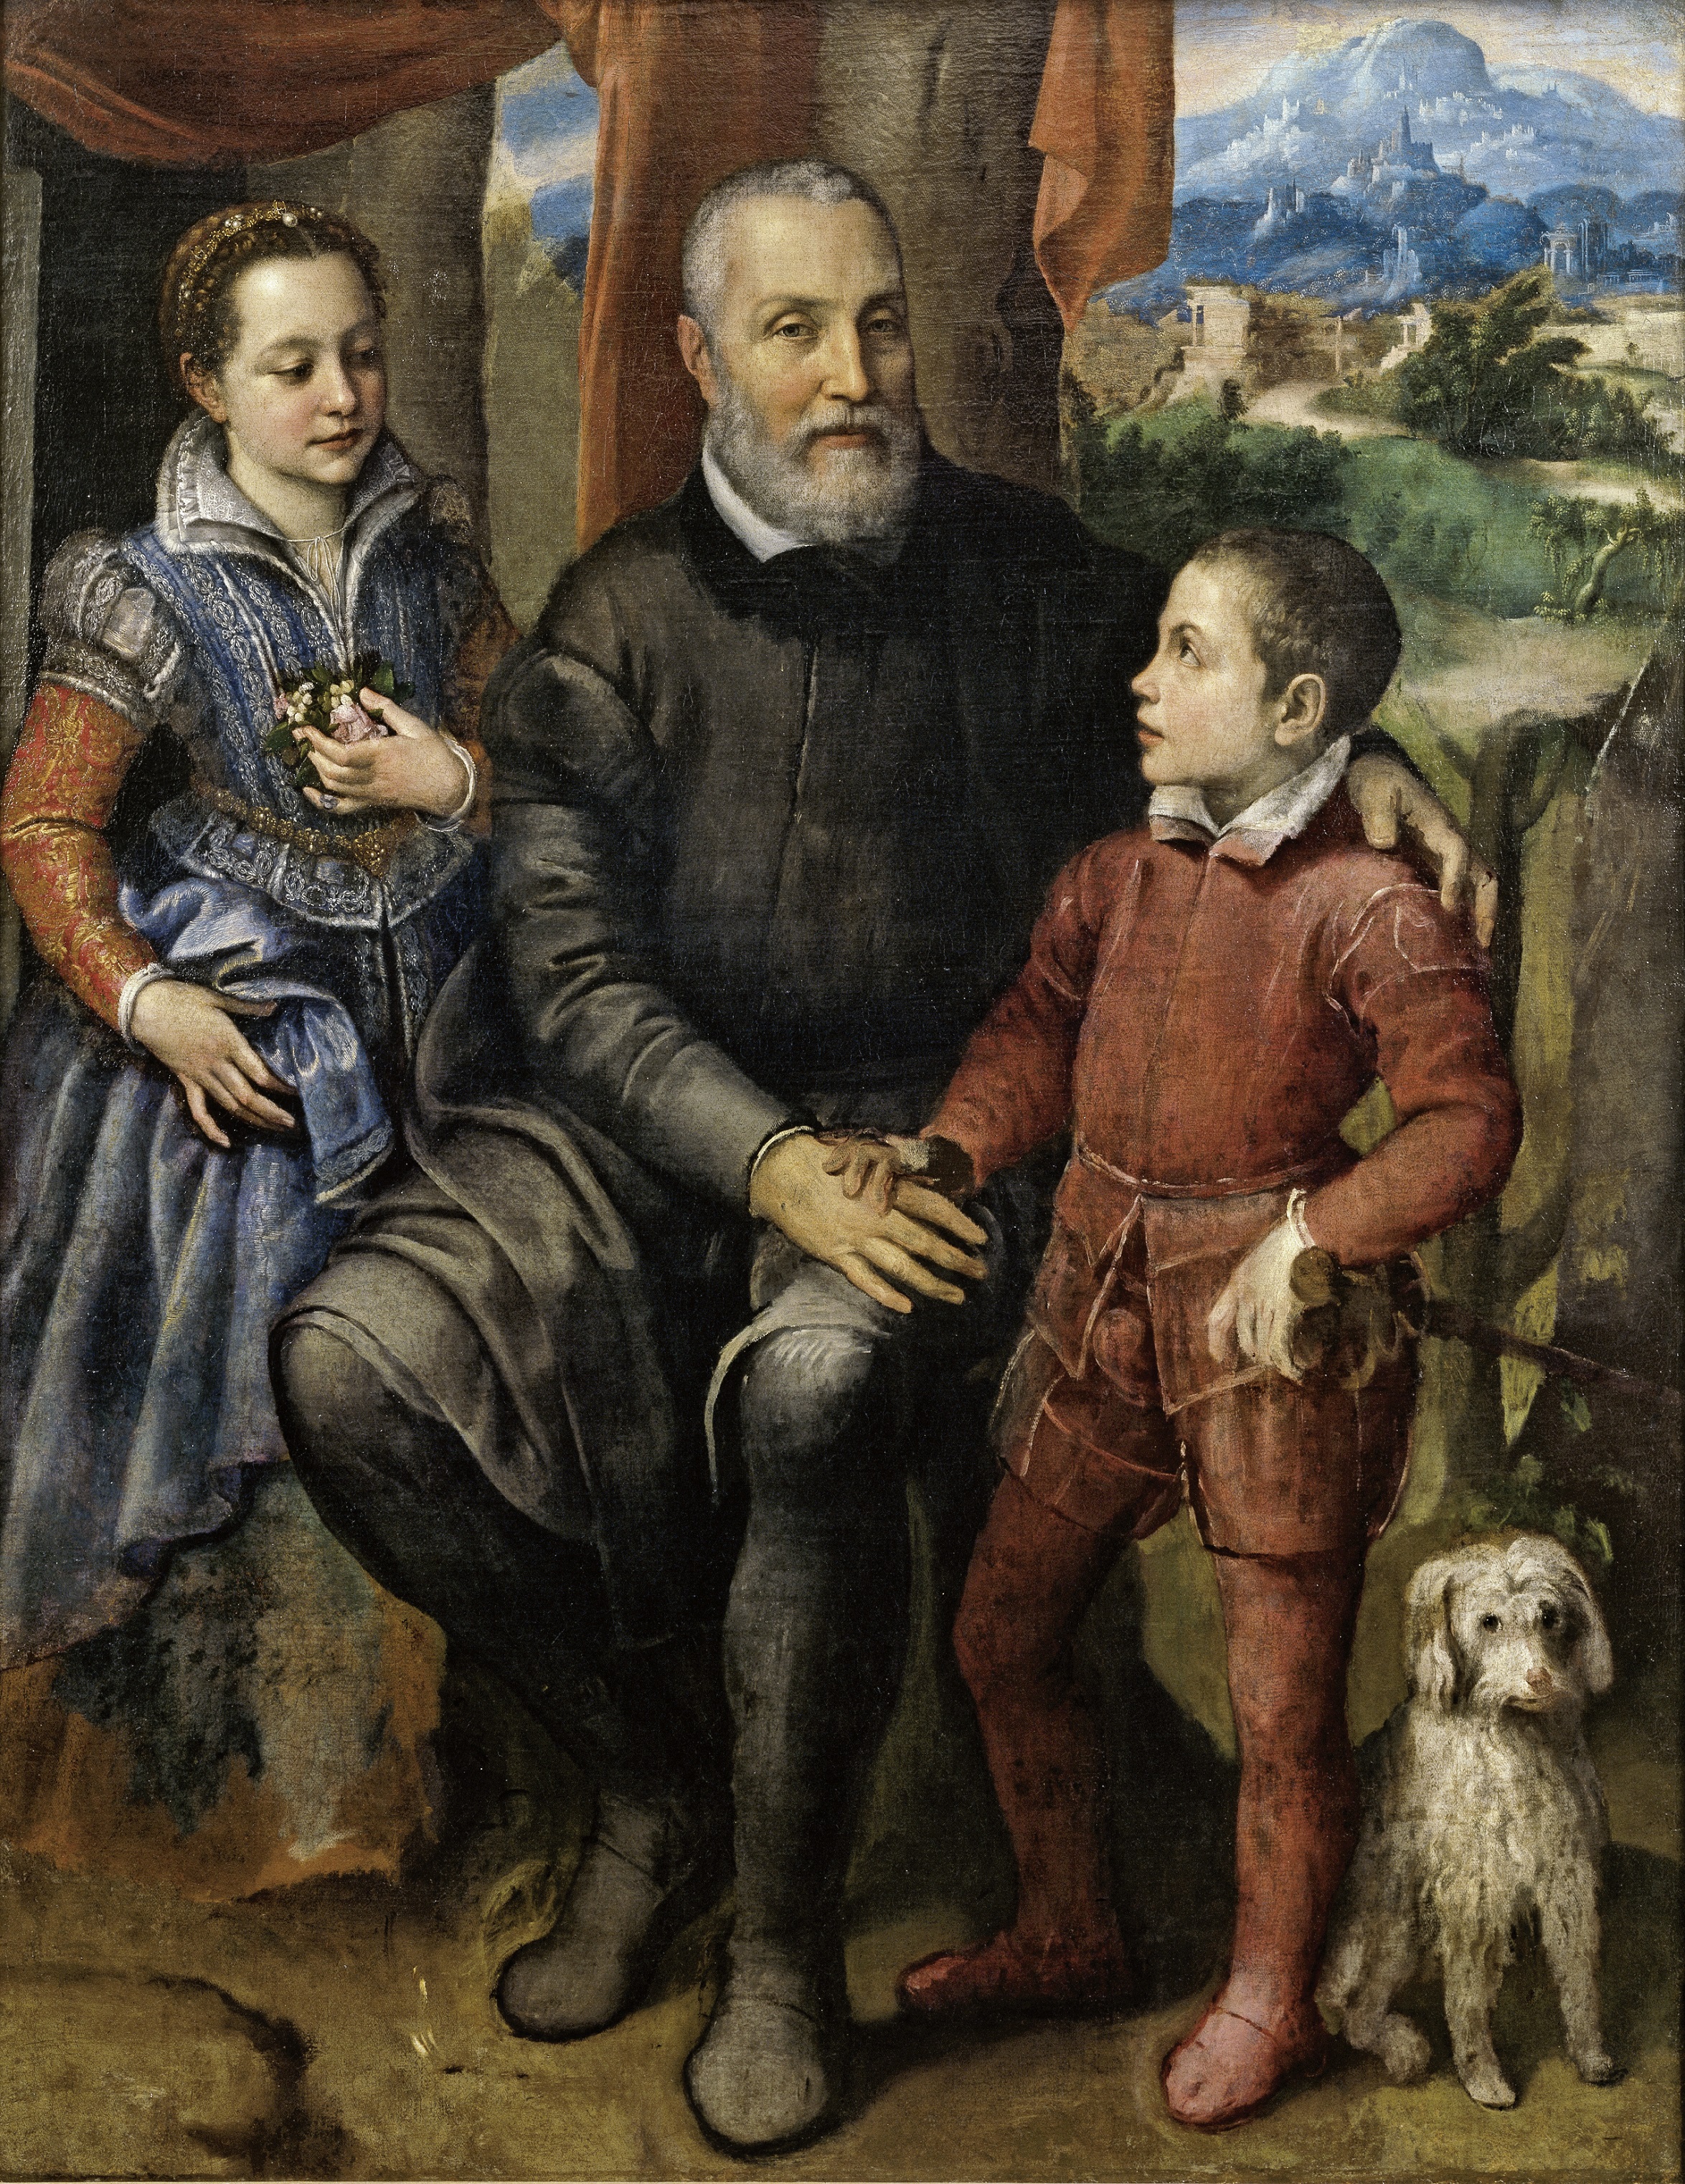 Portrait Group with the Artist’s Father Amilcare Anguissola, Brother Astrubale and Sister Minerva by Sofonisba Anguissola - Ca. 1559 - 157 x 122 cm Europeana